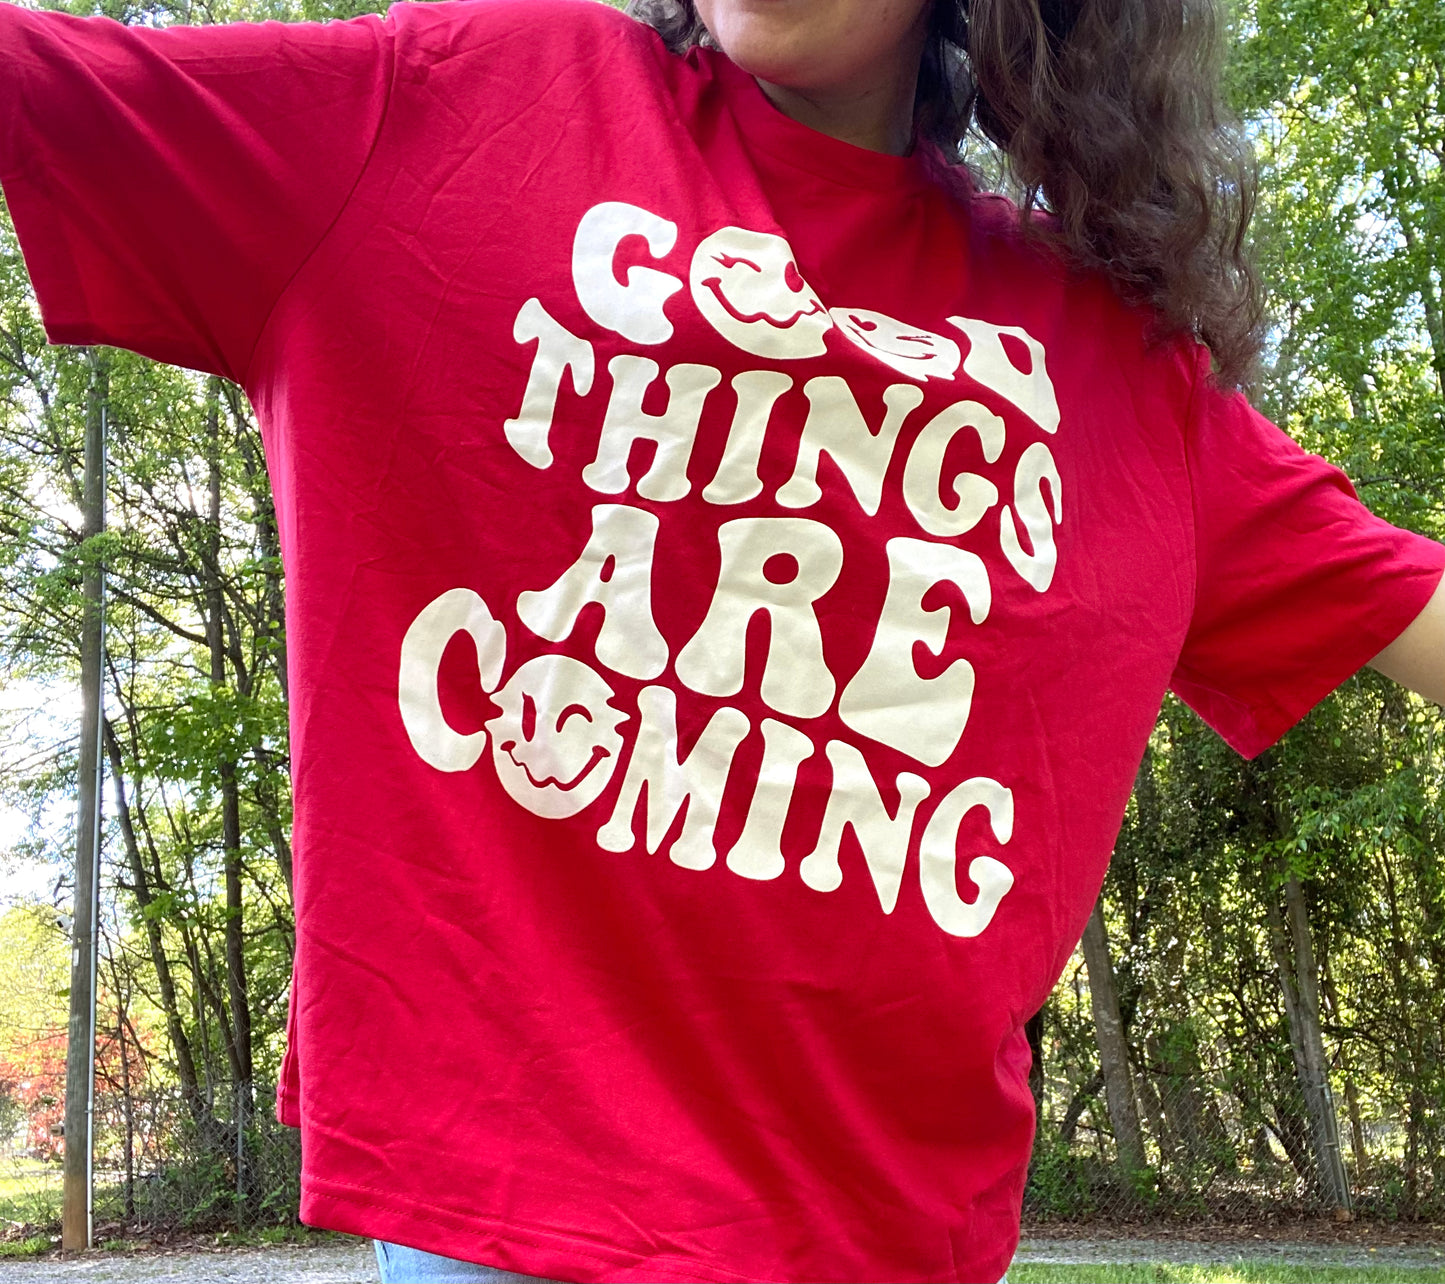 Good Things Are Coming Preppy Aesthetic Smiley Face Graphic Tee